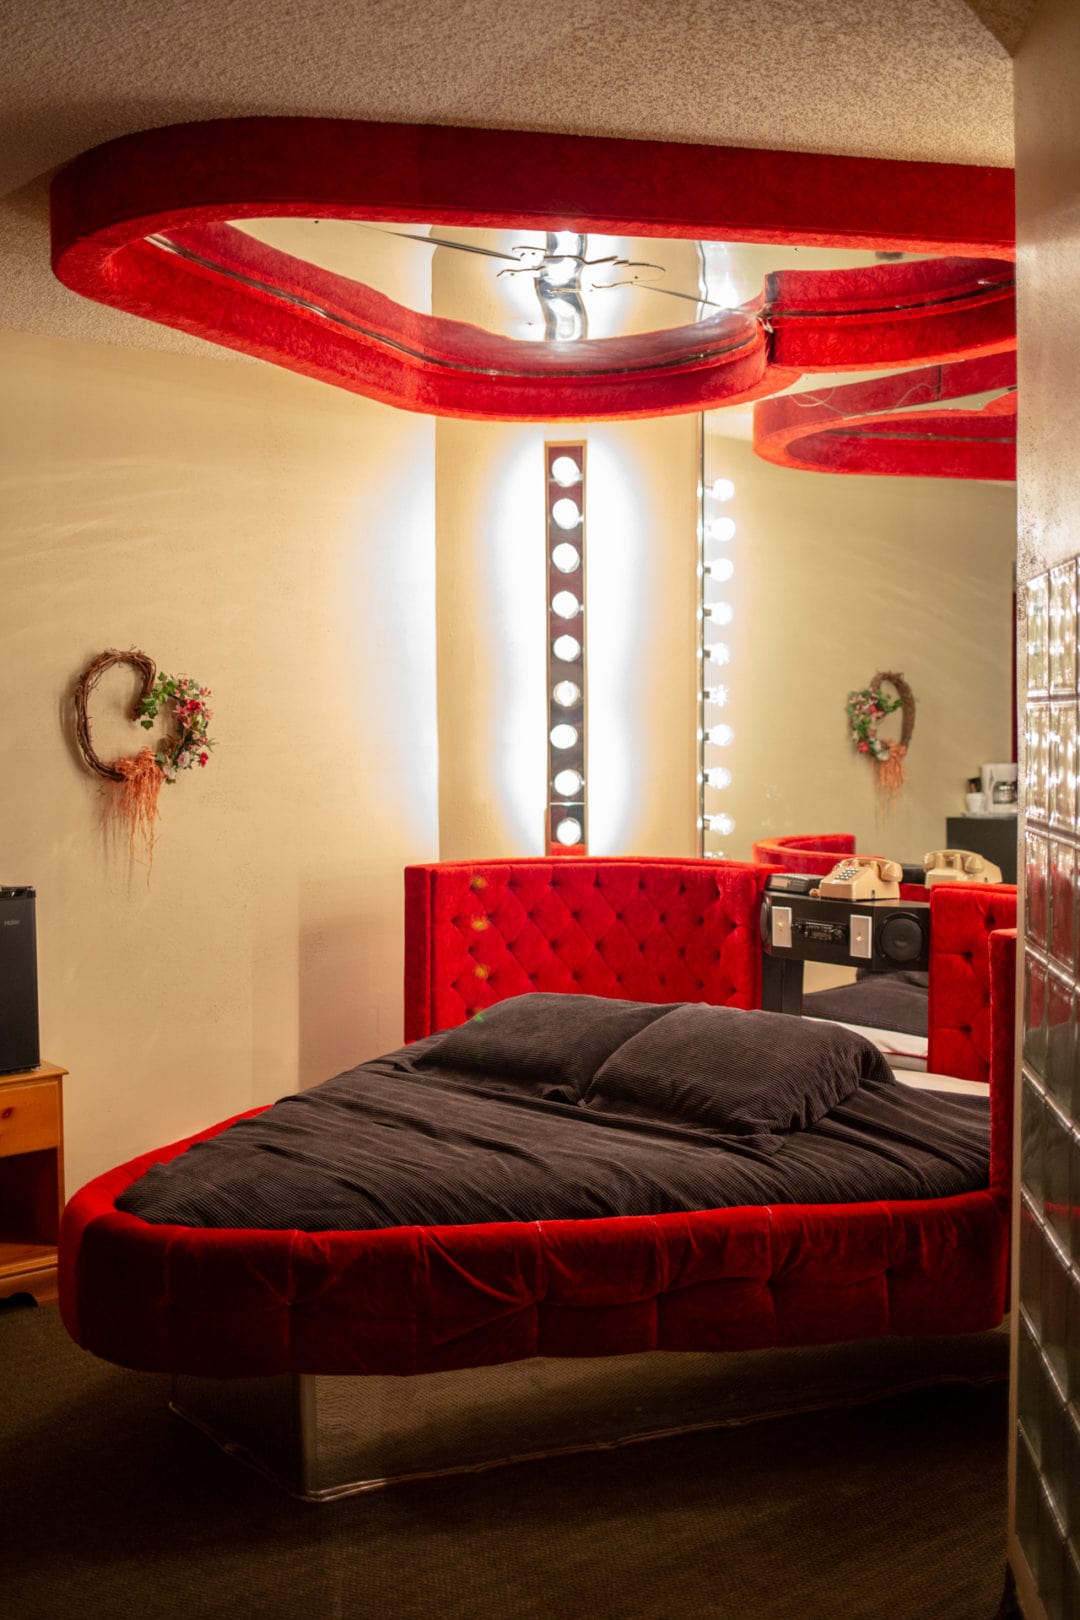 Themed hotel rooms near you | Roadtrippers